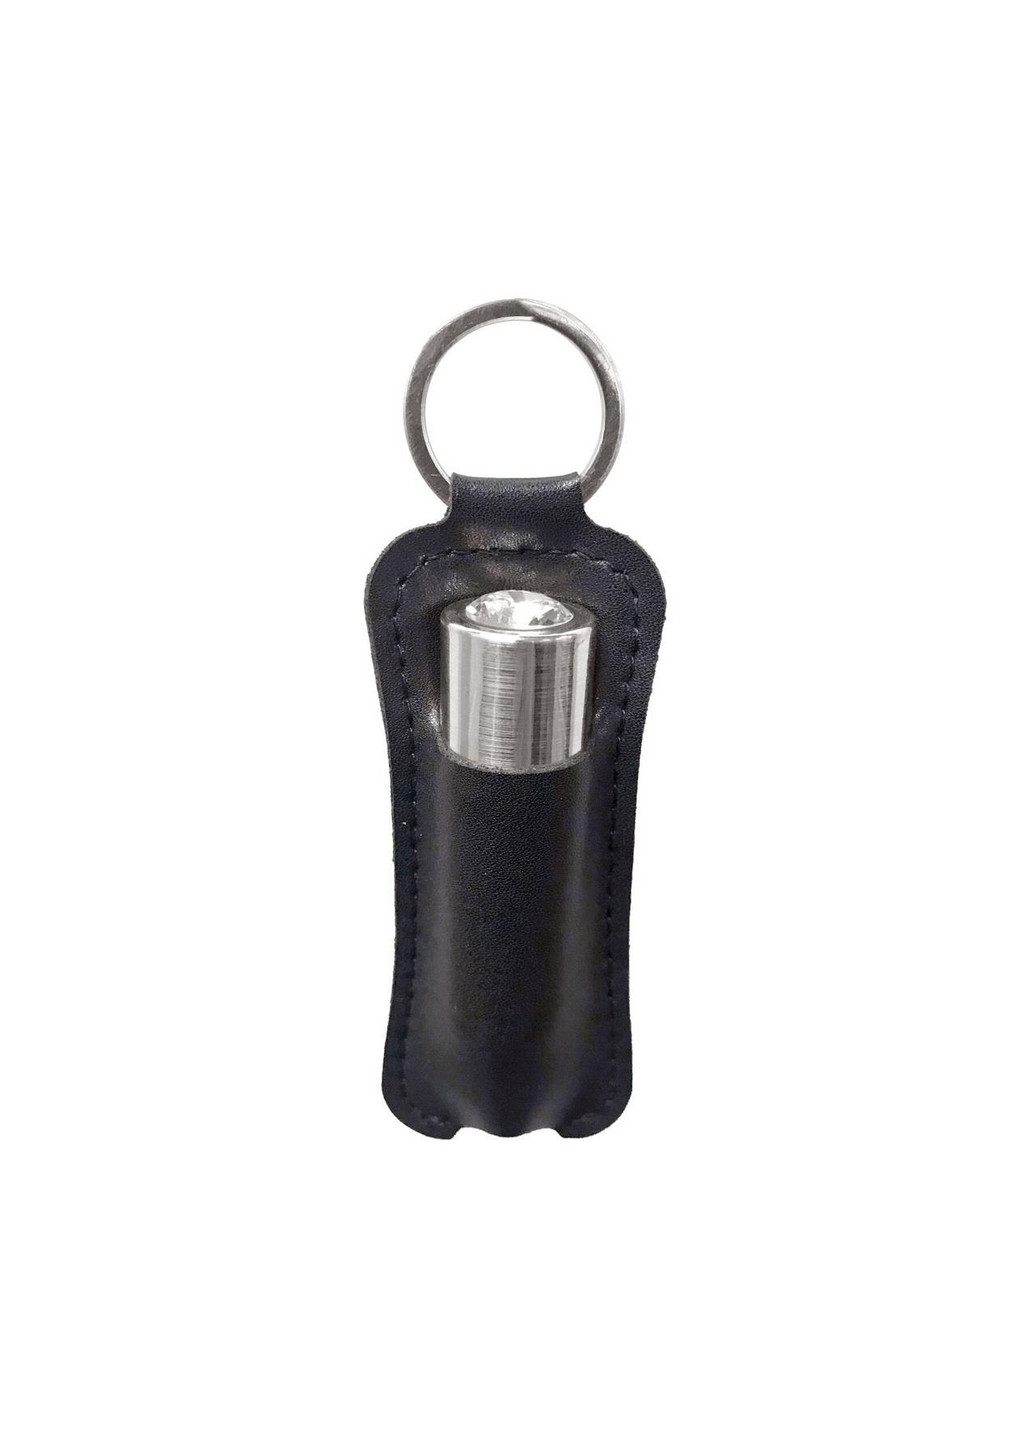 Віброкуль - First-Class Bullet 2.5" with Key Chain Pouch PowerBullet (260450763)